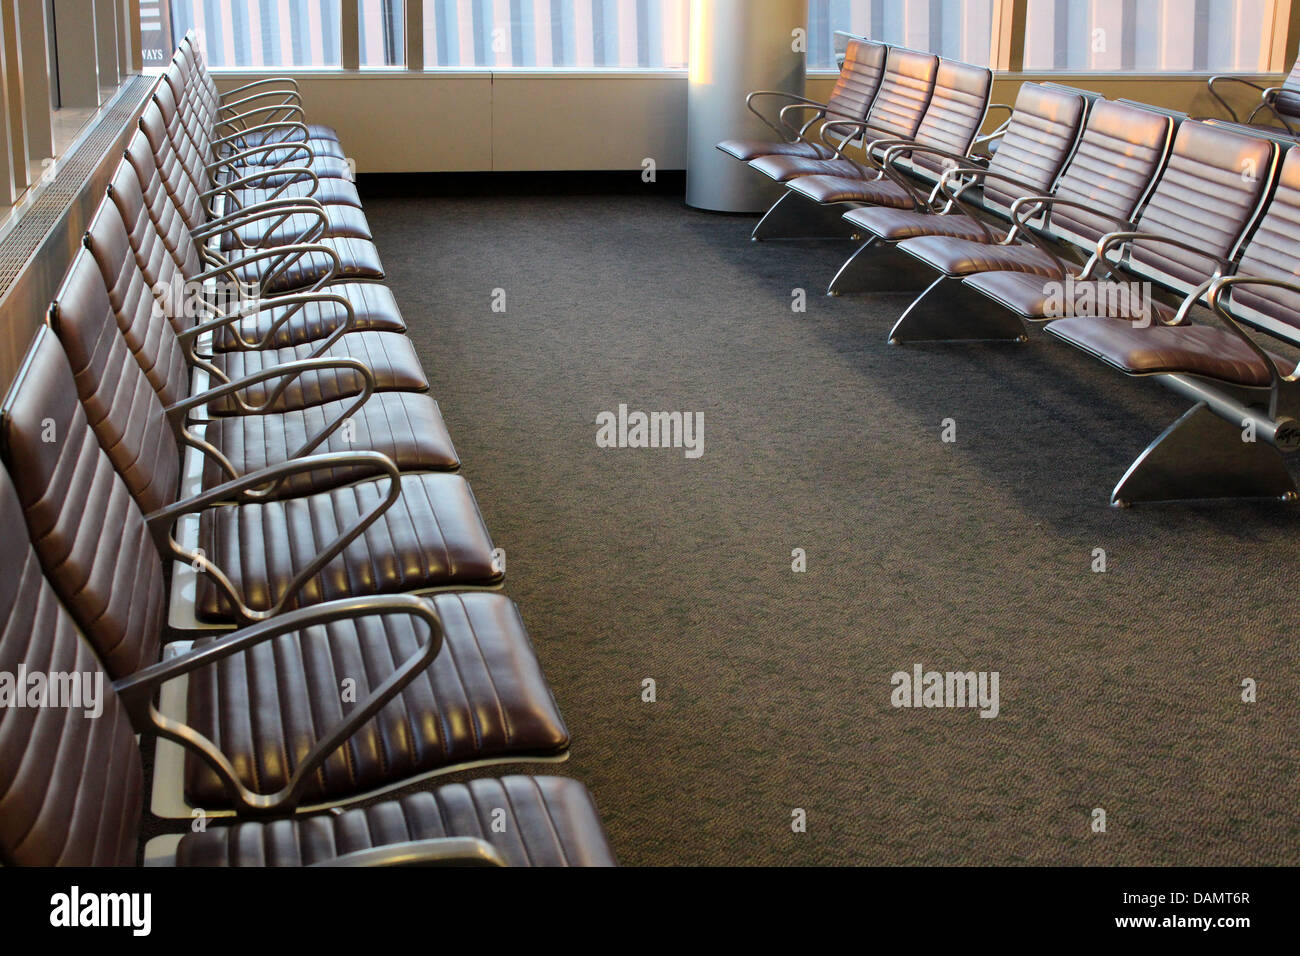 Empty rows of seats in comfortable airport lobby in early morning hours on any given day. Stock Photo